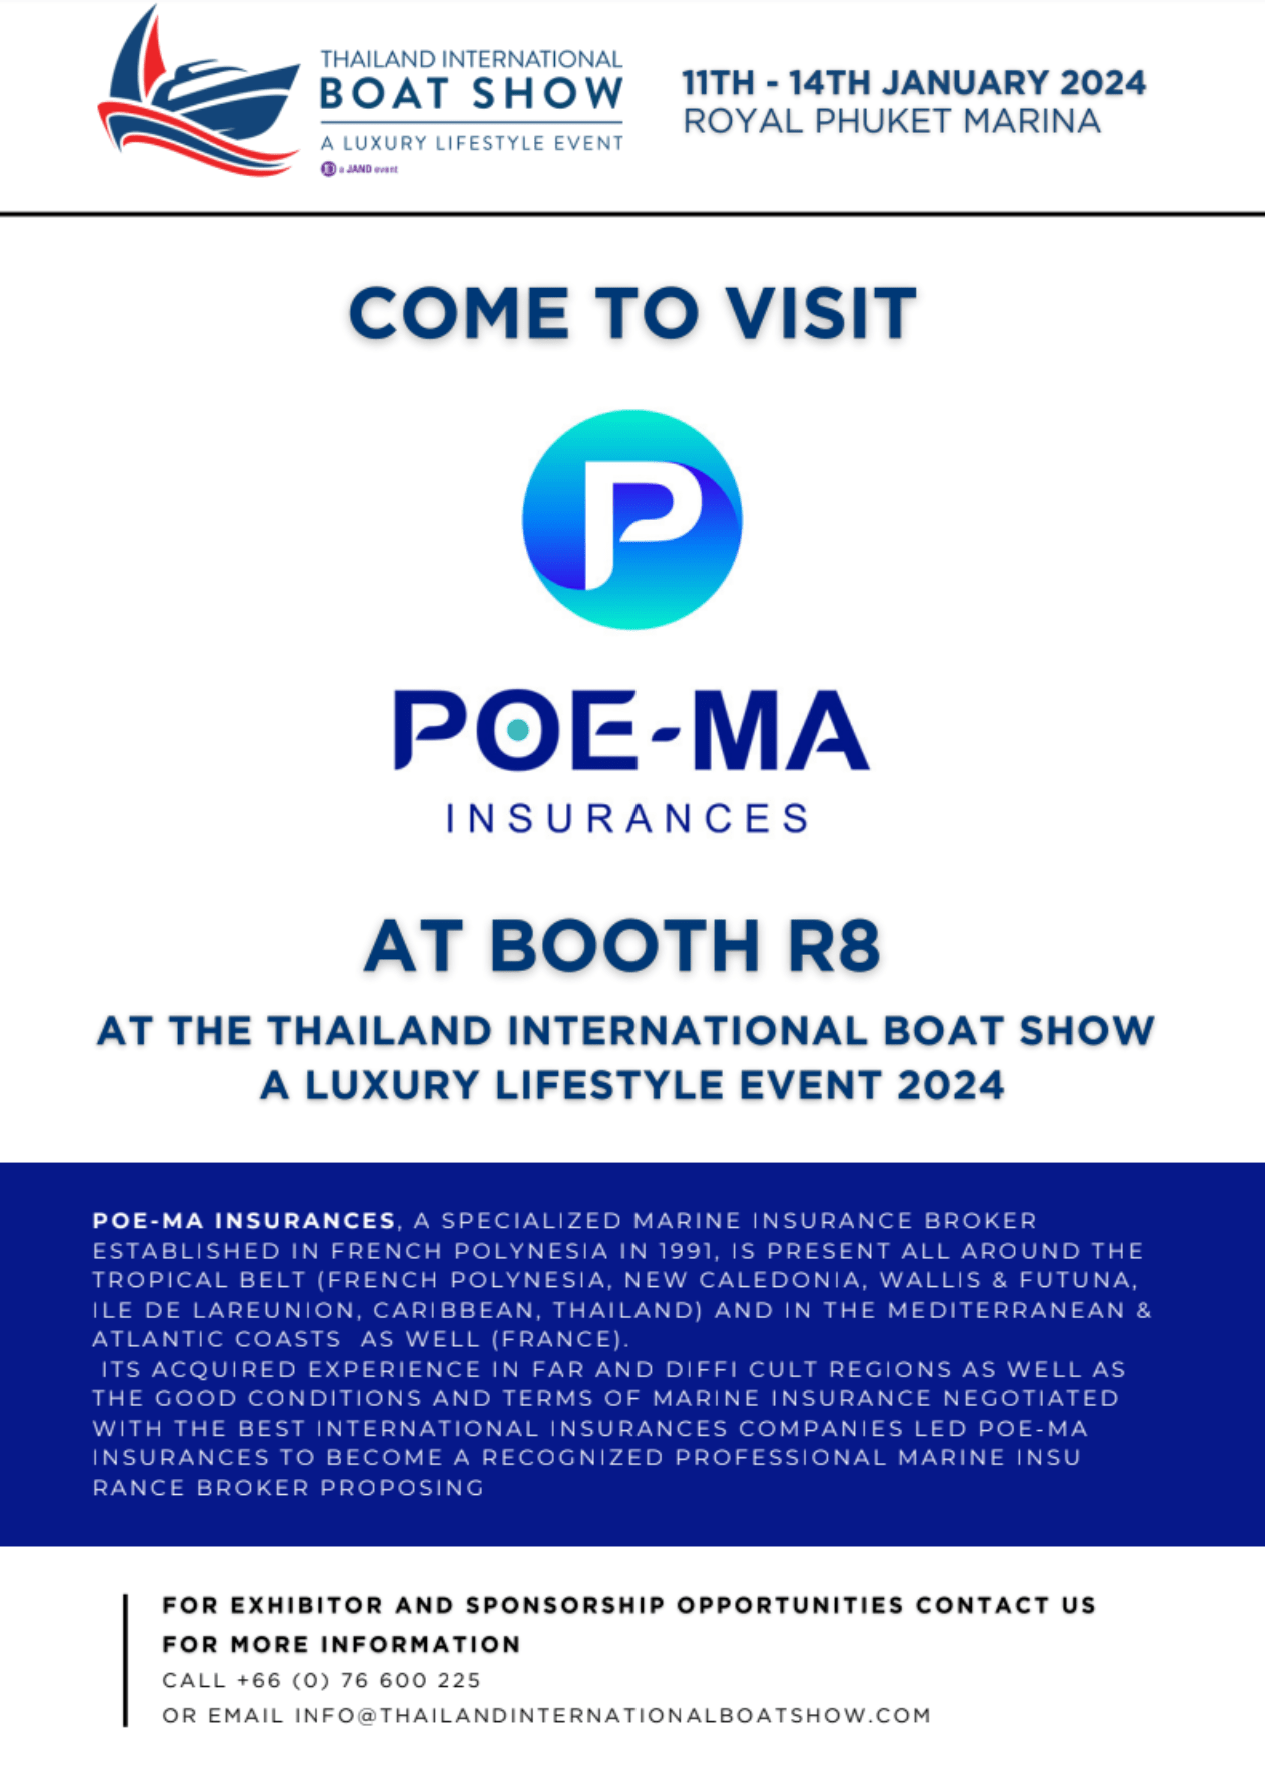 Come to visit POE-MA INSURANCES Booth R8 at The Thailand International Boat Show A Luxury Lifestyle Event 2024